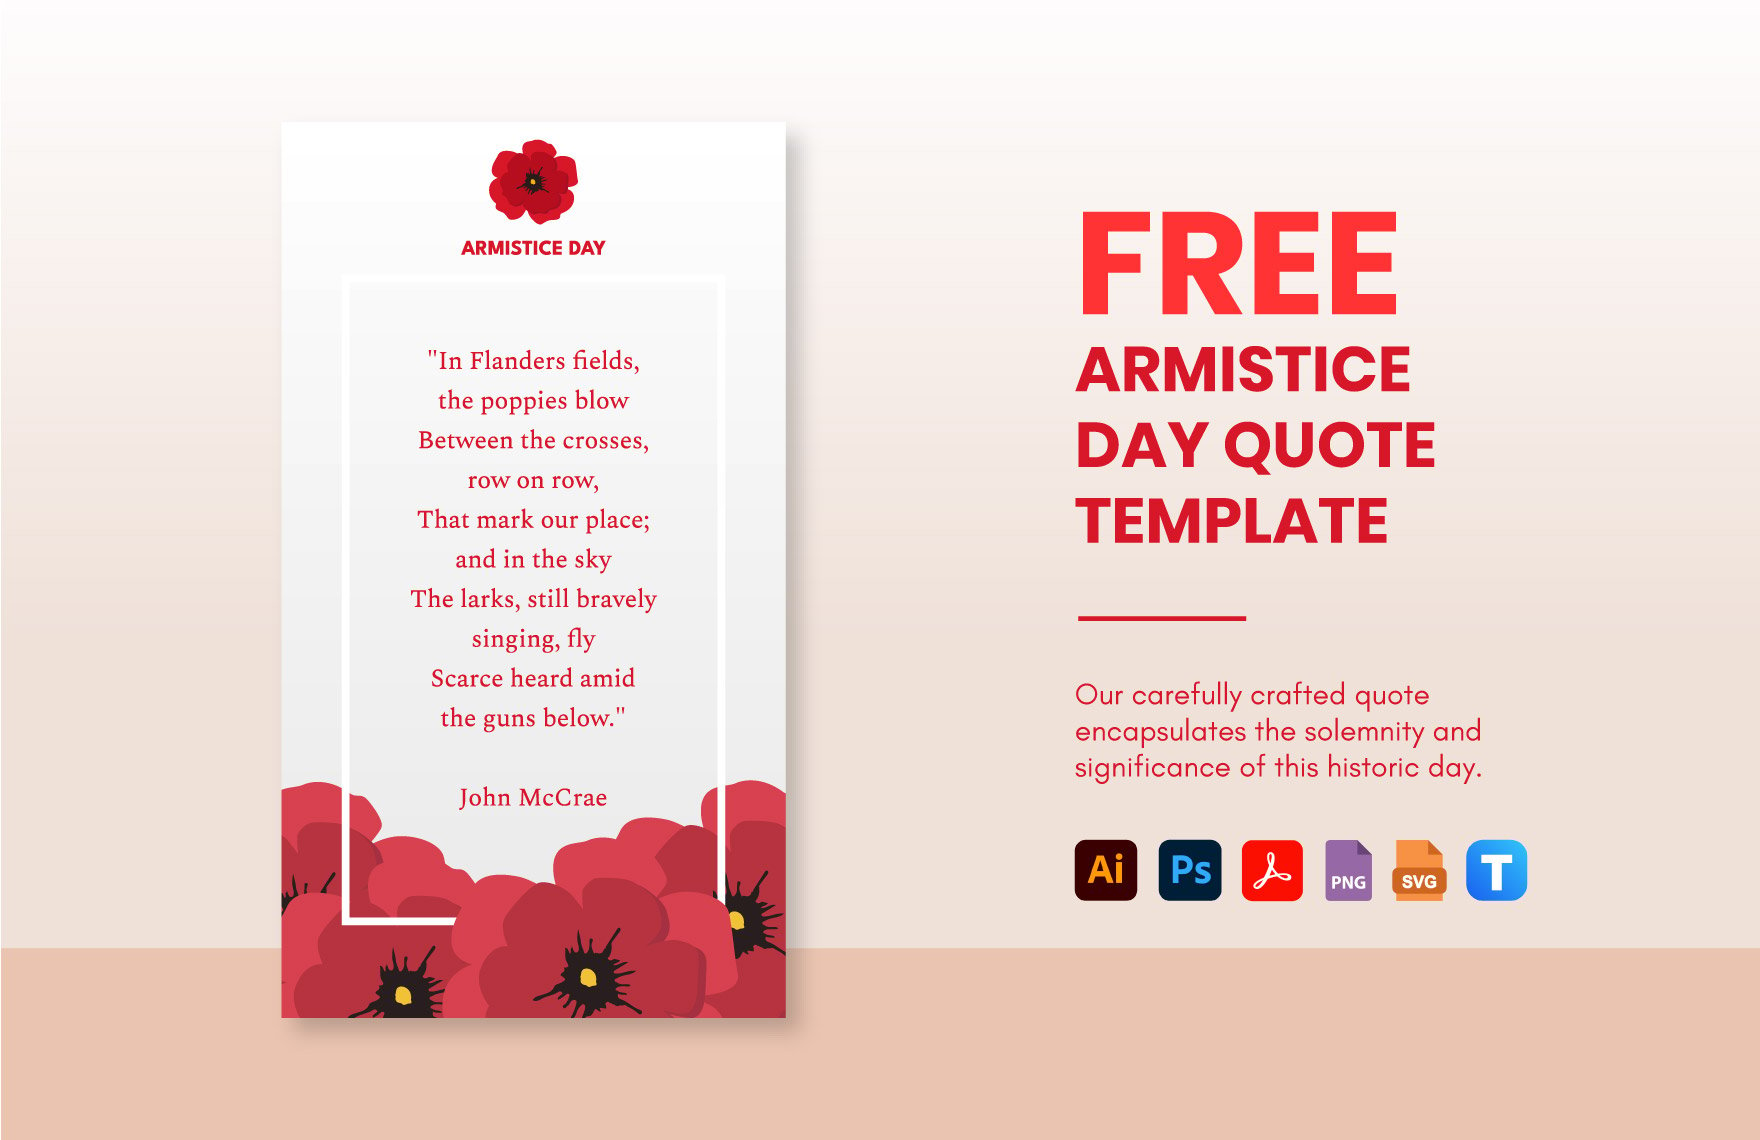 Free Armistice Day Quote in PDF, Illustrator, PSD, SVG, PNG